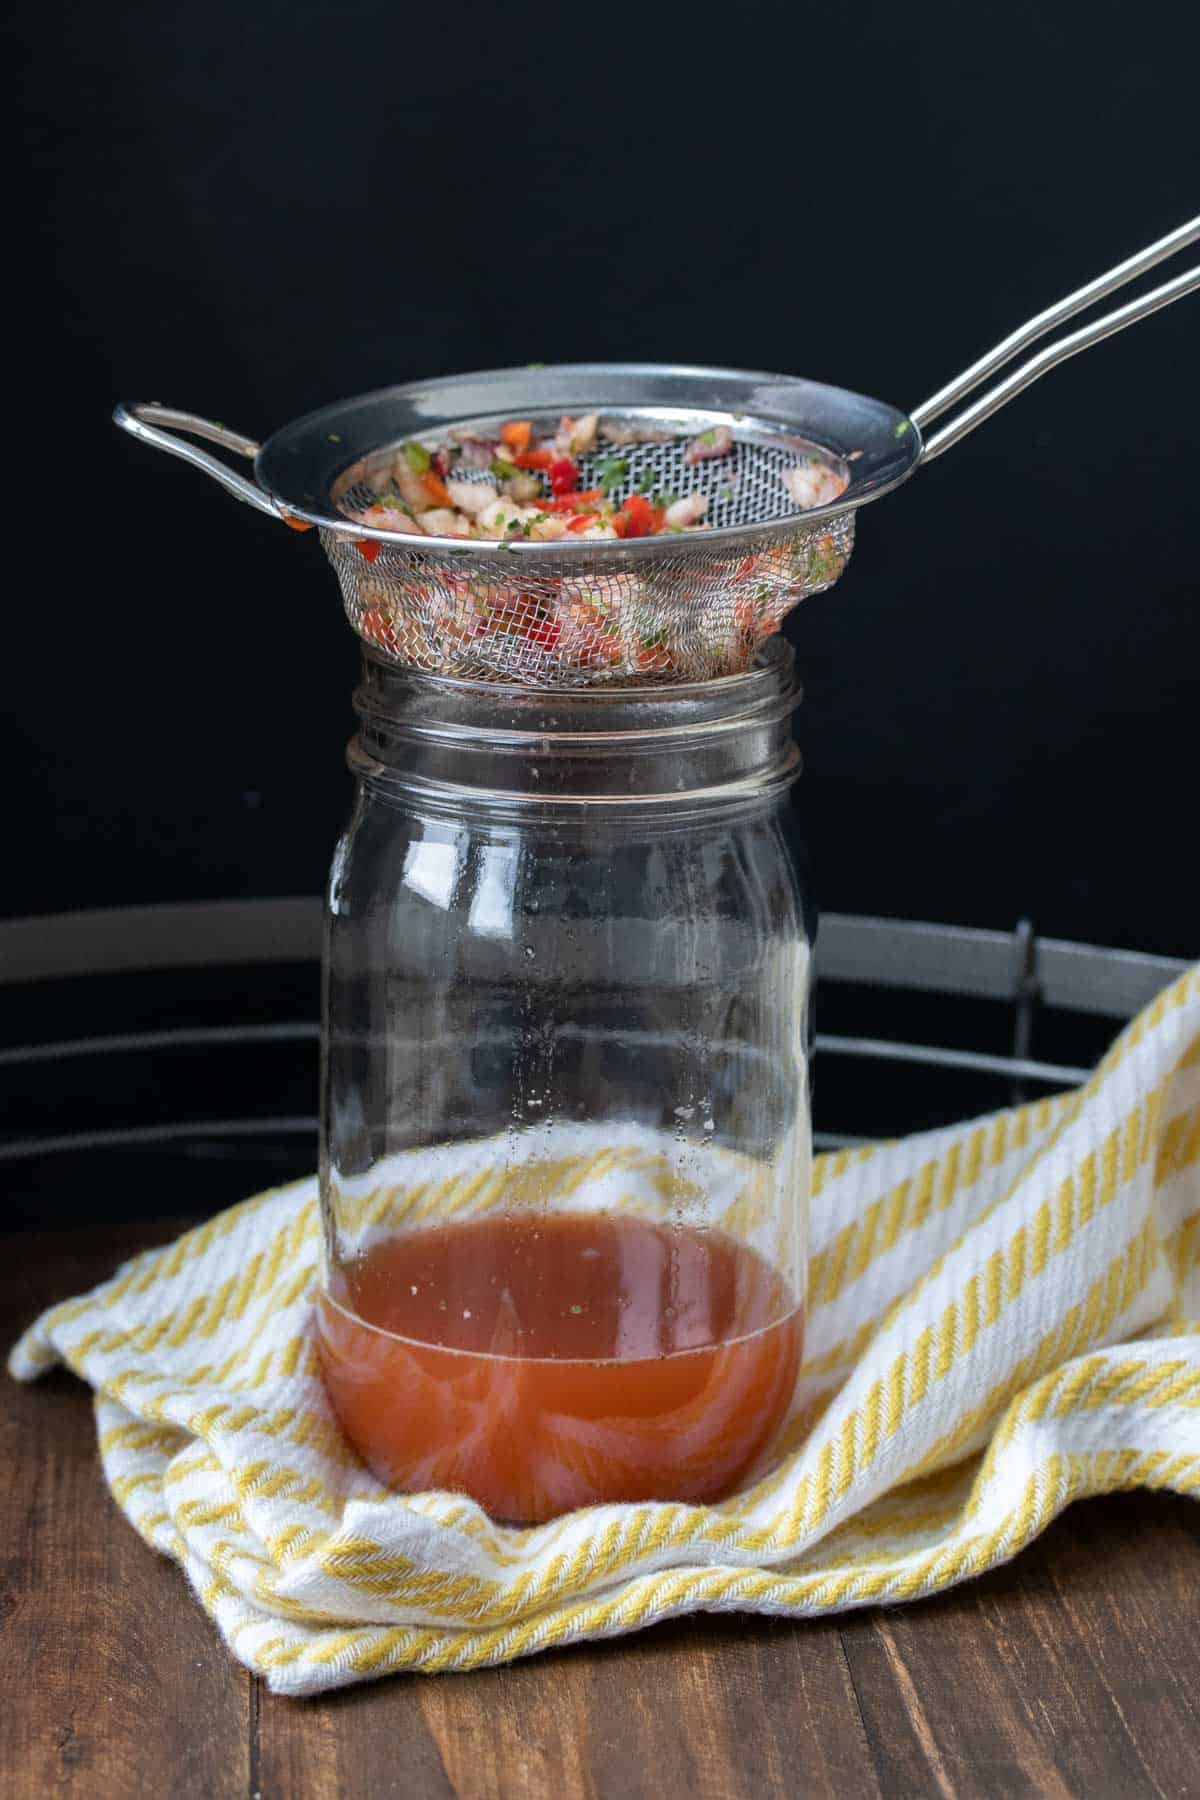 Pineapple salsa being drained through a sieve into a glass jar